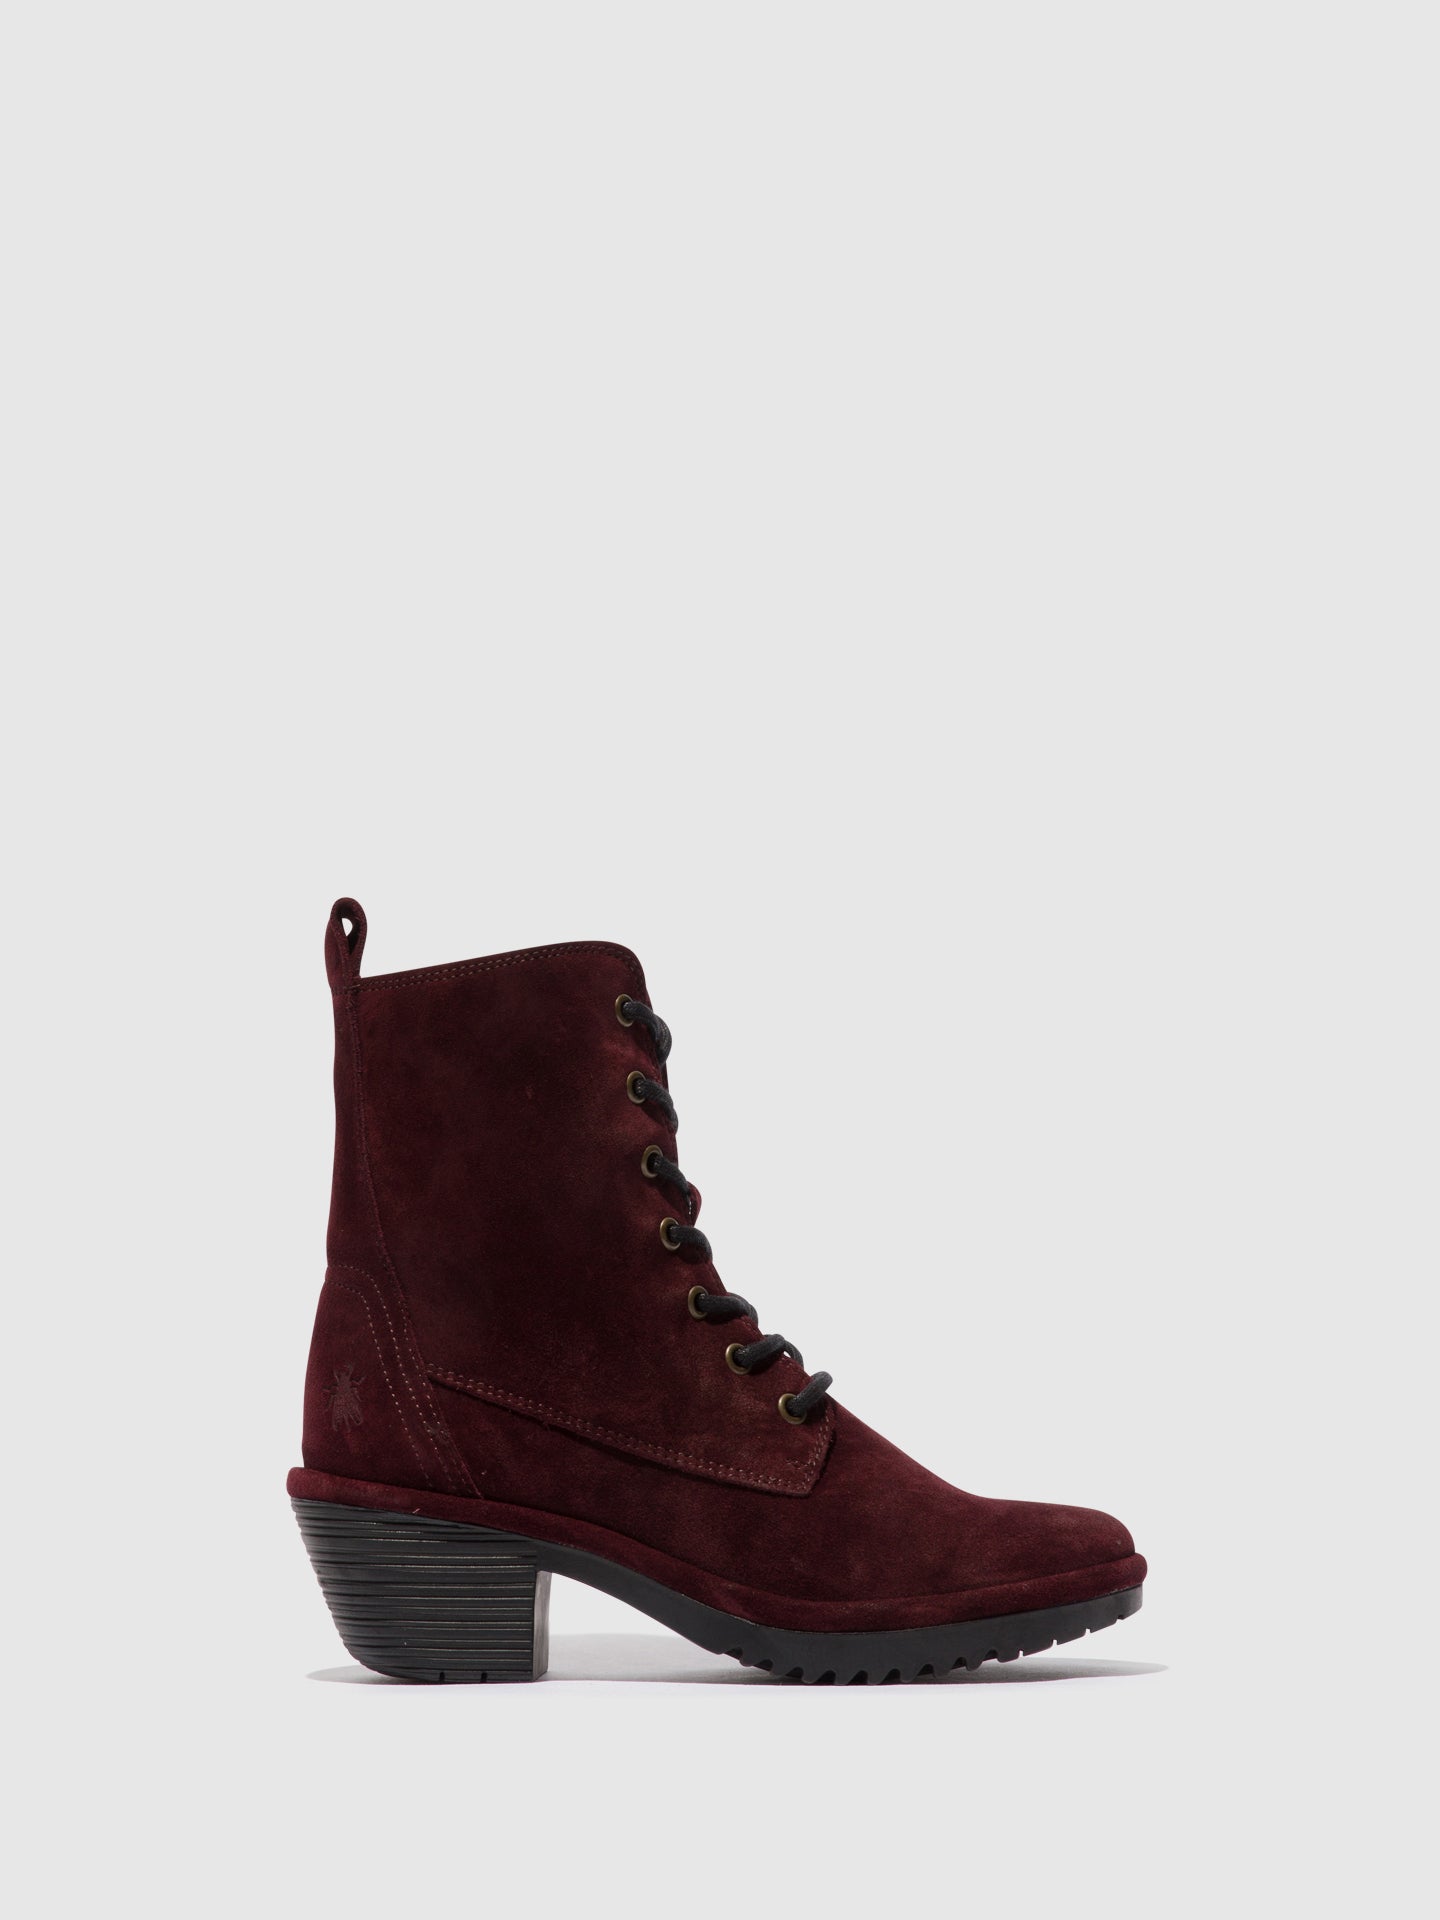 Fly London Lace-up Ankle Boots WEBE244FLY OILSUEDE WINE